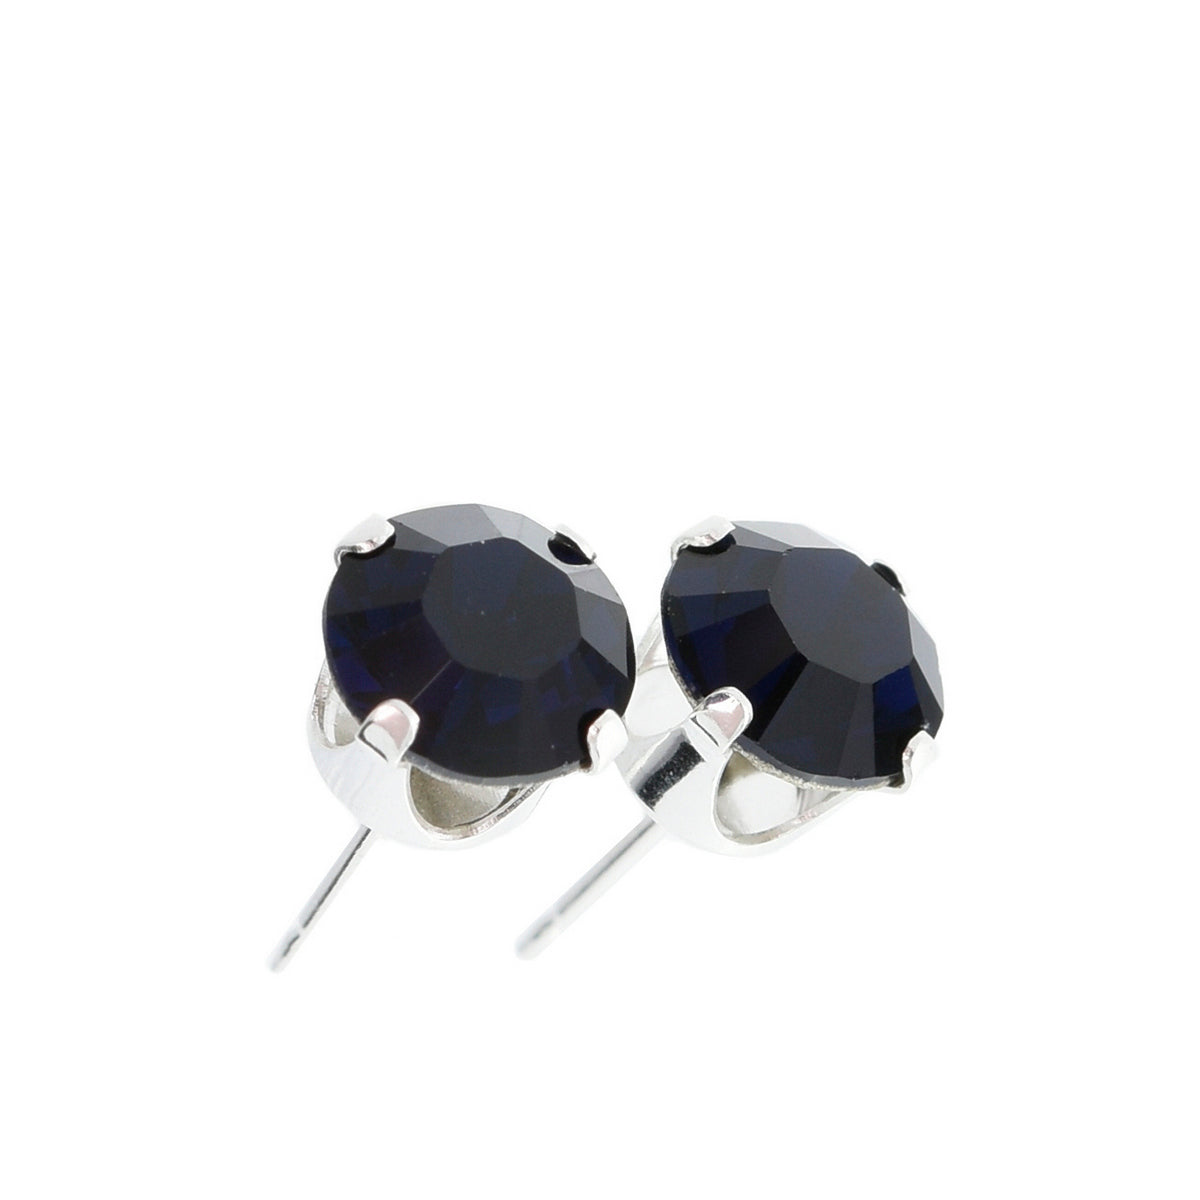 pewterhooter® Women's Classic Collection 925 Sterling silver earrings with sparkling Indigo Blue crystals, packaged in a gift box for any occasion.